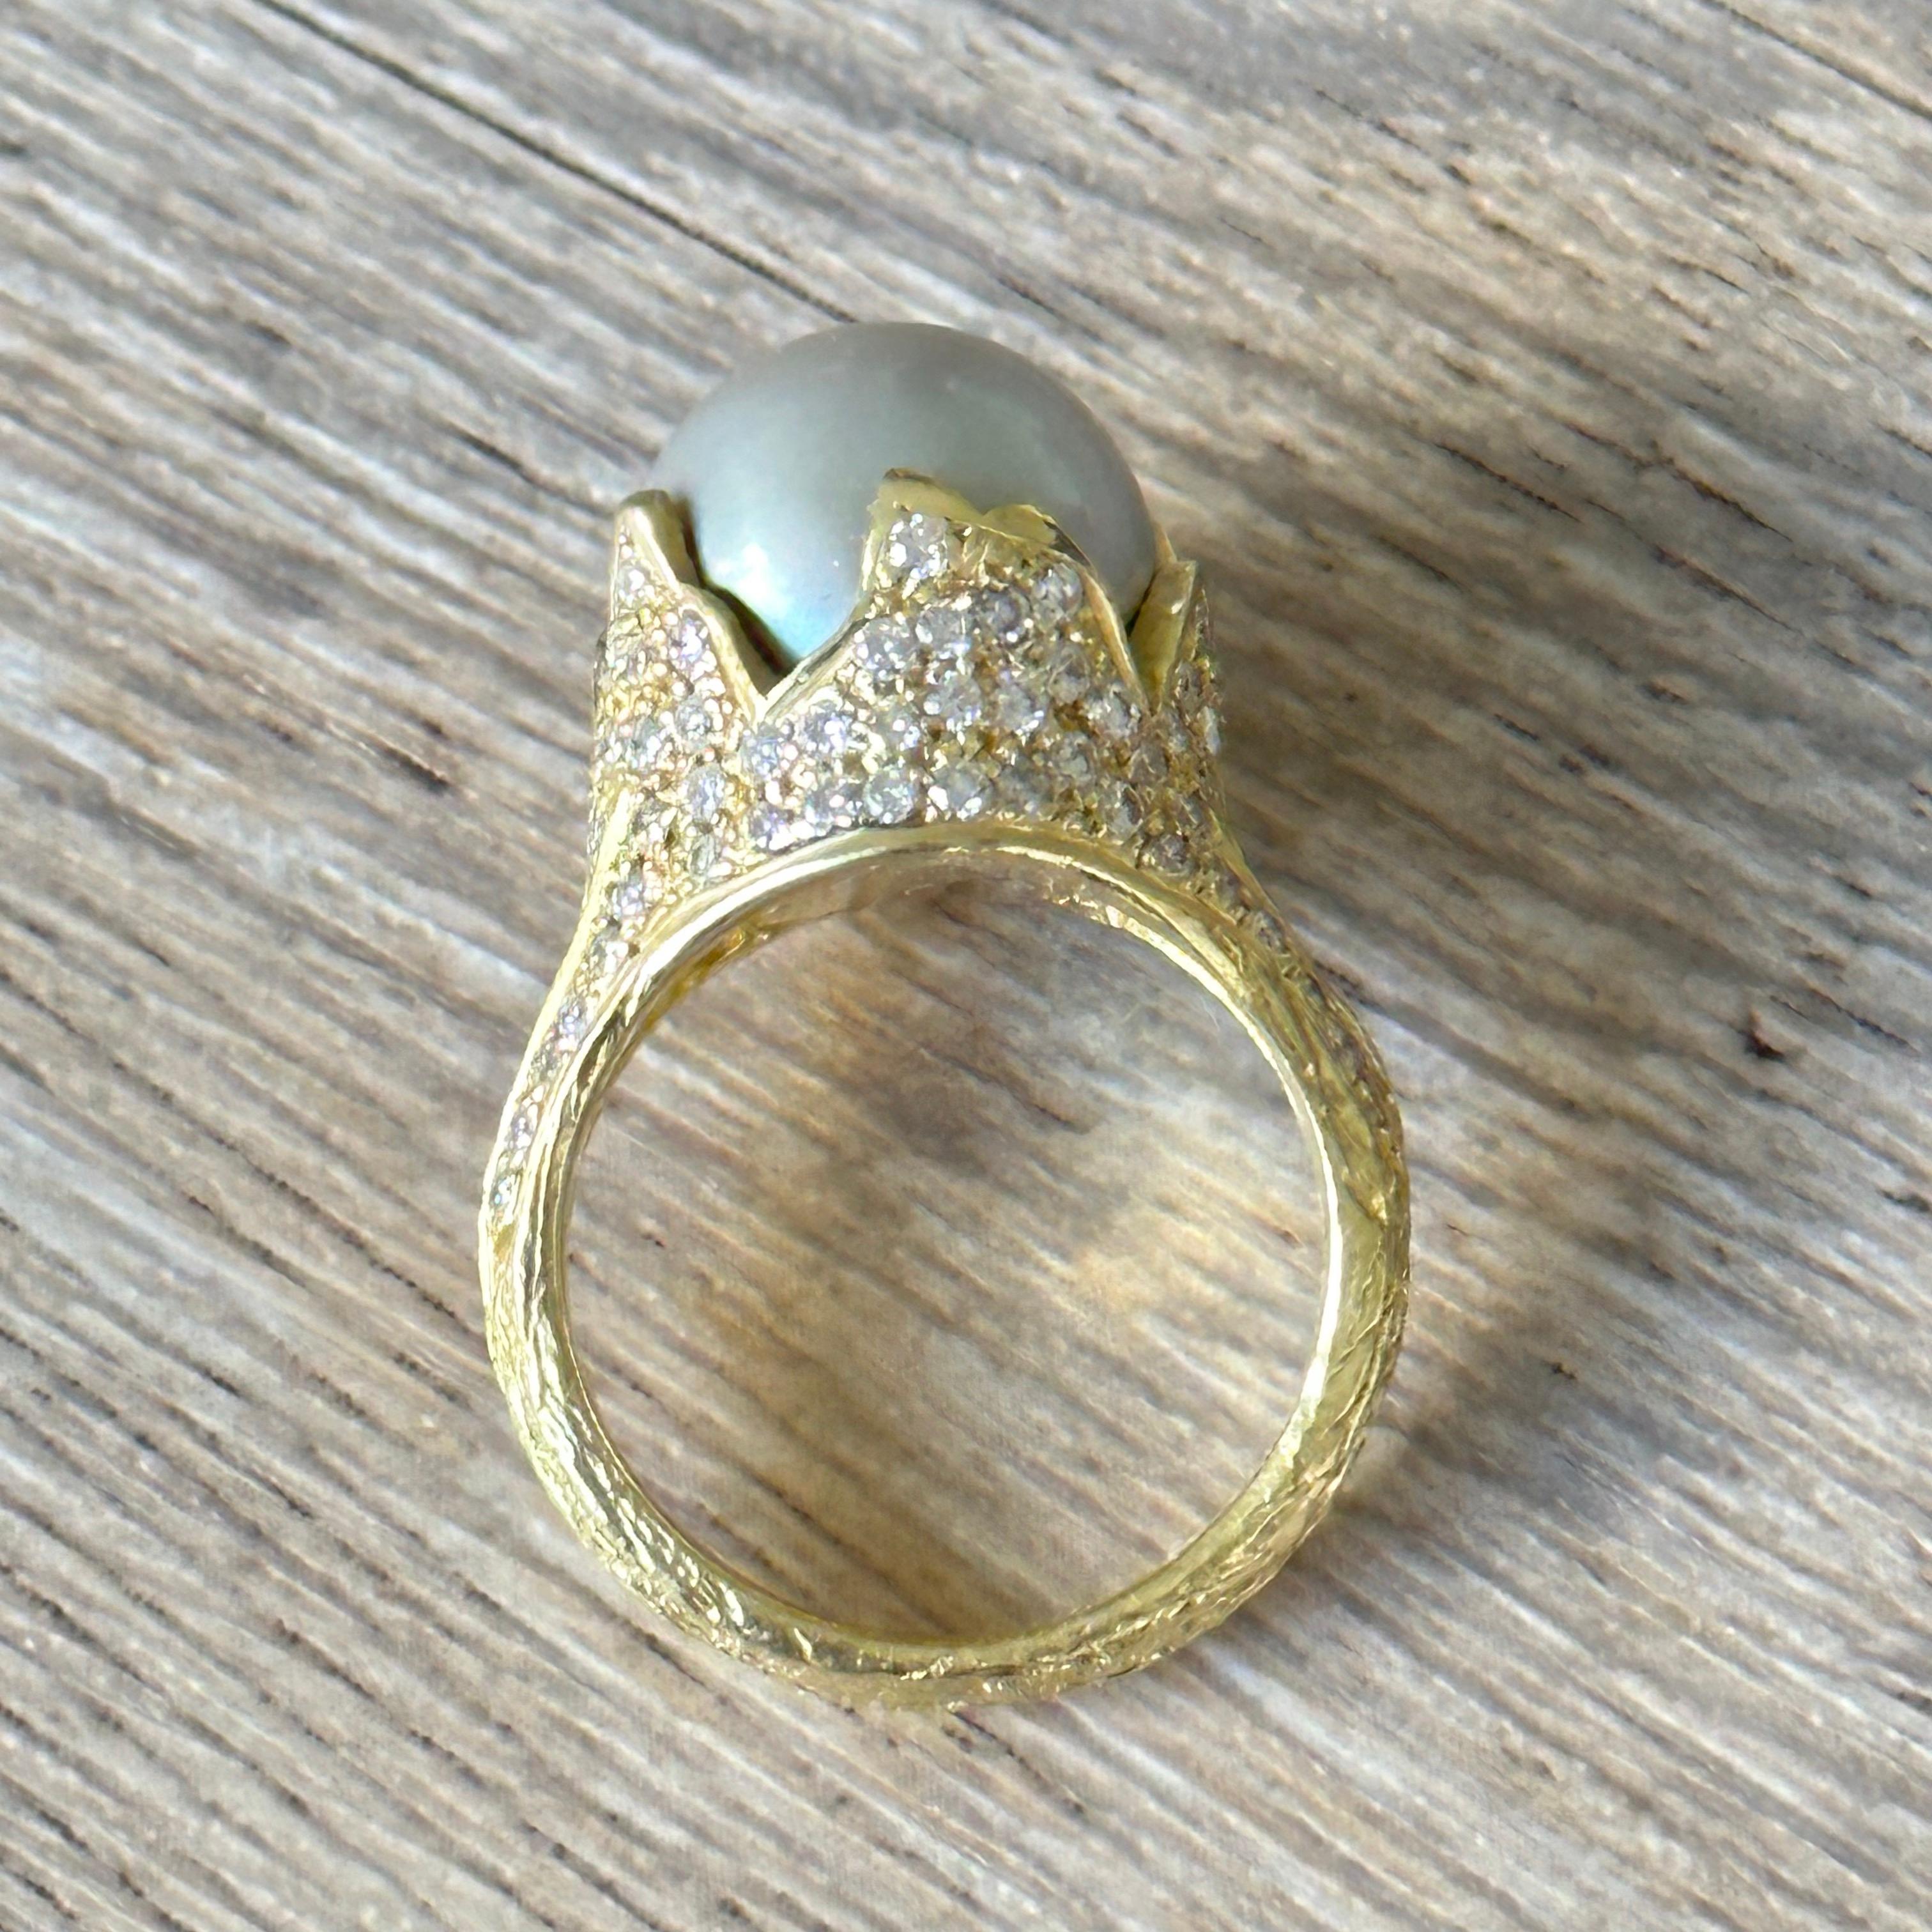 New ring in 18 carat gold, 750 thousandths gold, from the American brand Samira 13 set with a beautiful Tahitian pearl 12 millimeters in diameter and studded with diamonds.
Its ring size is 53 for a gross weight of 14.35 grams.
Value new in store